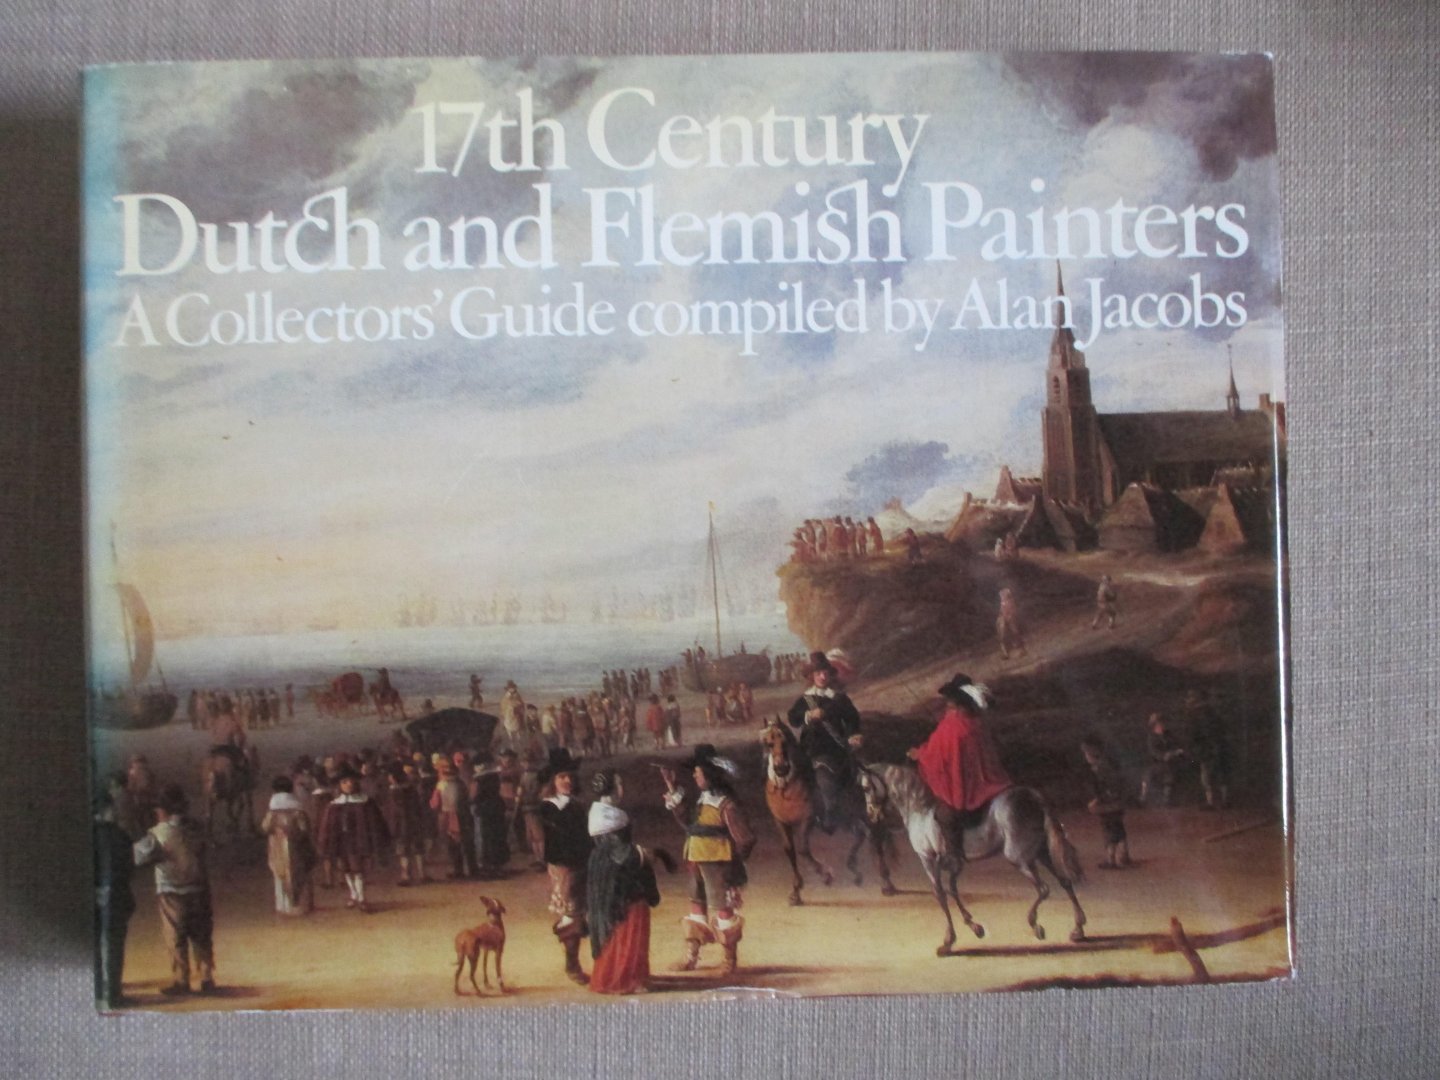 Jacobs, Alan - 17th century dutch and flemish painters / a collector's guide